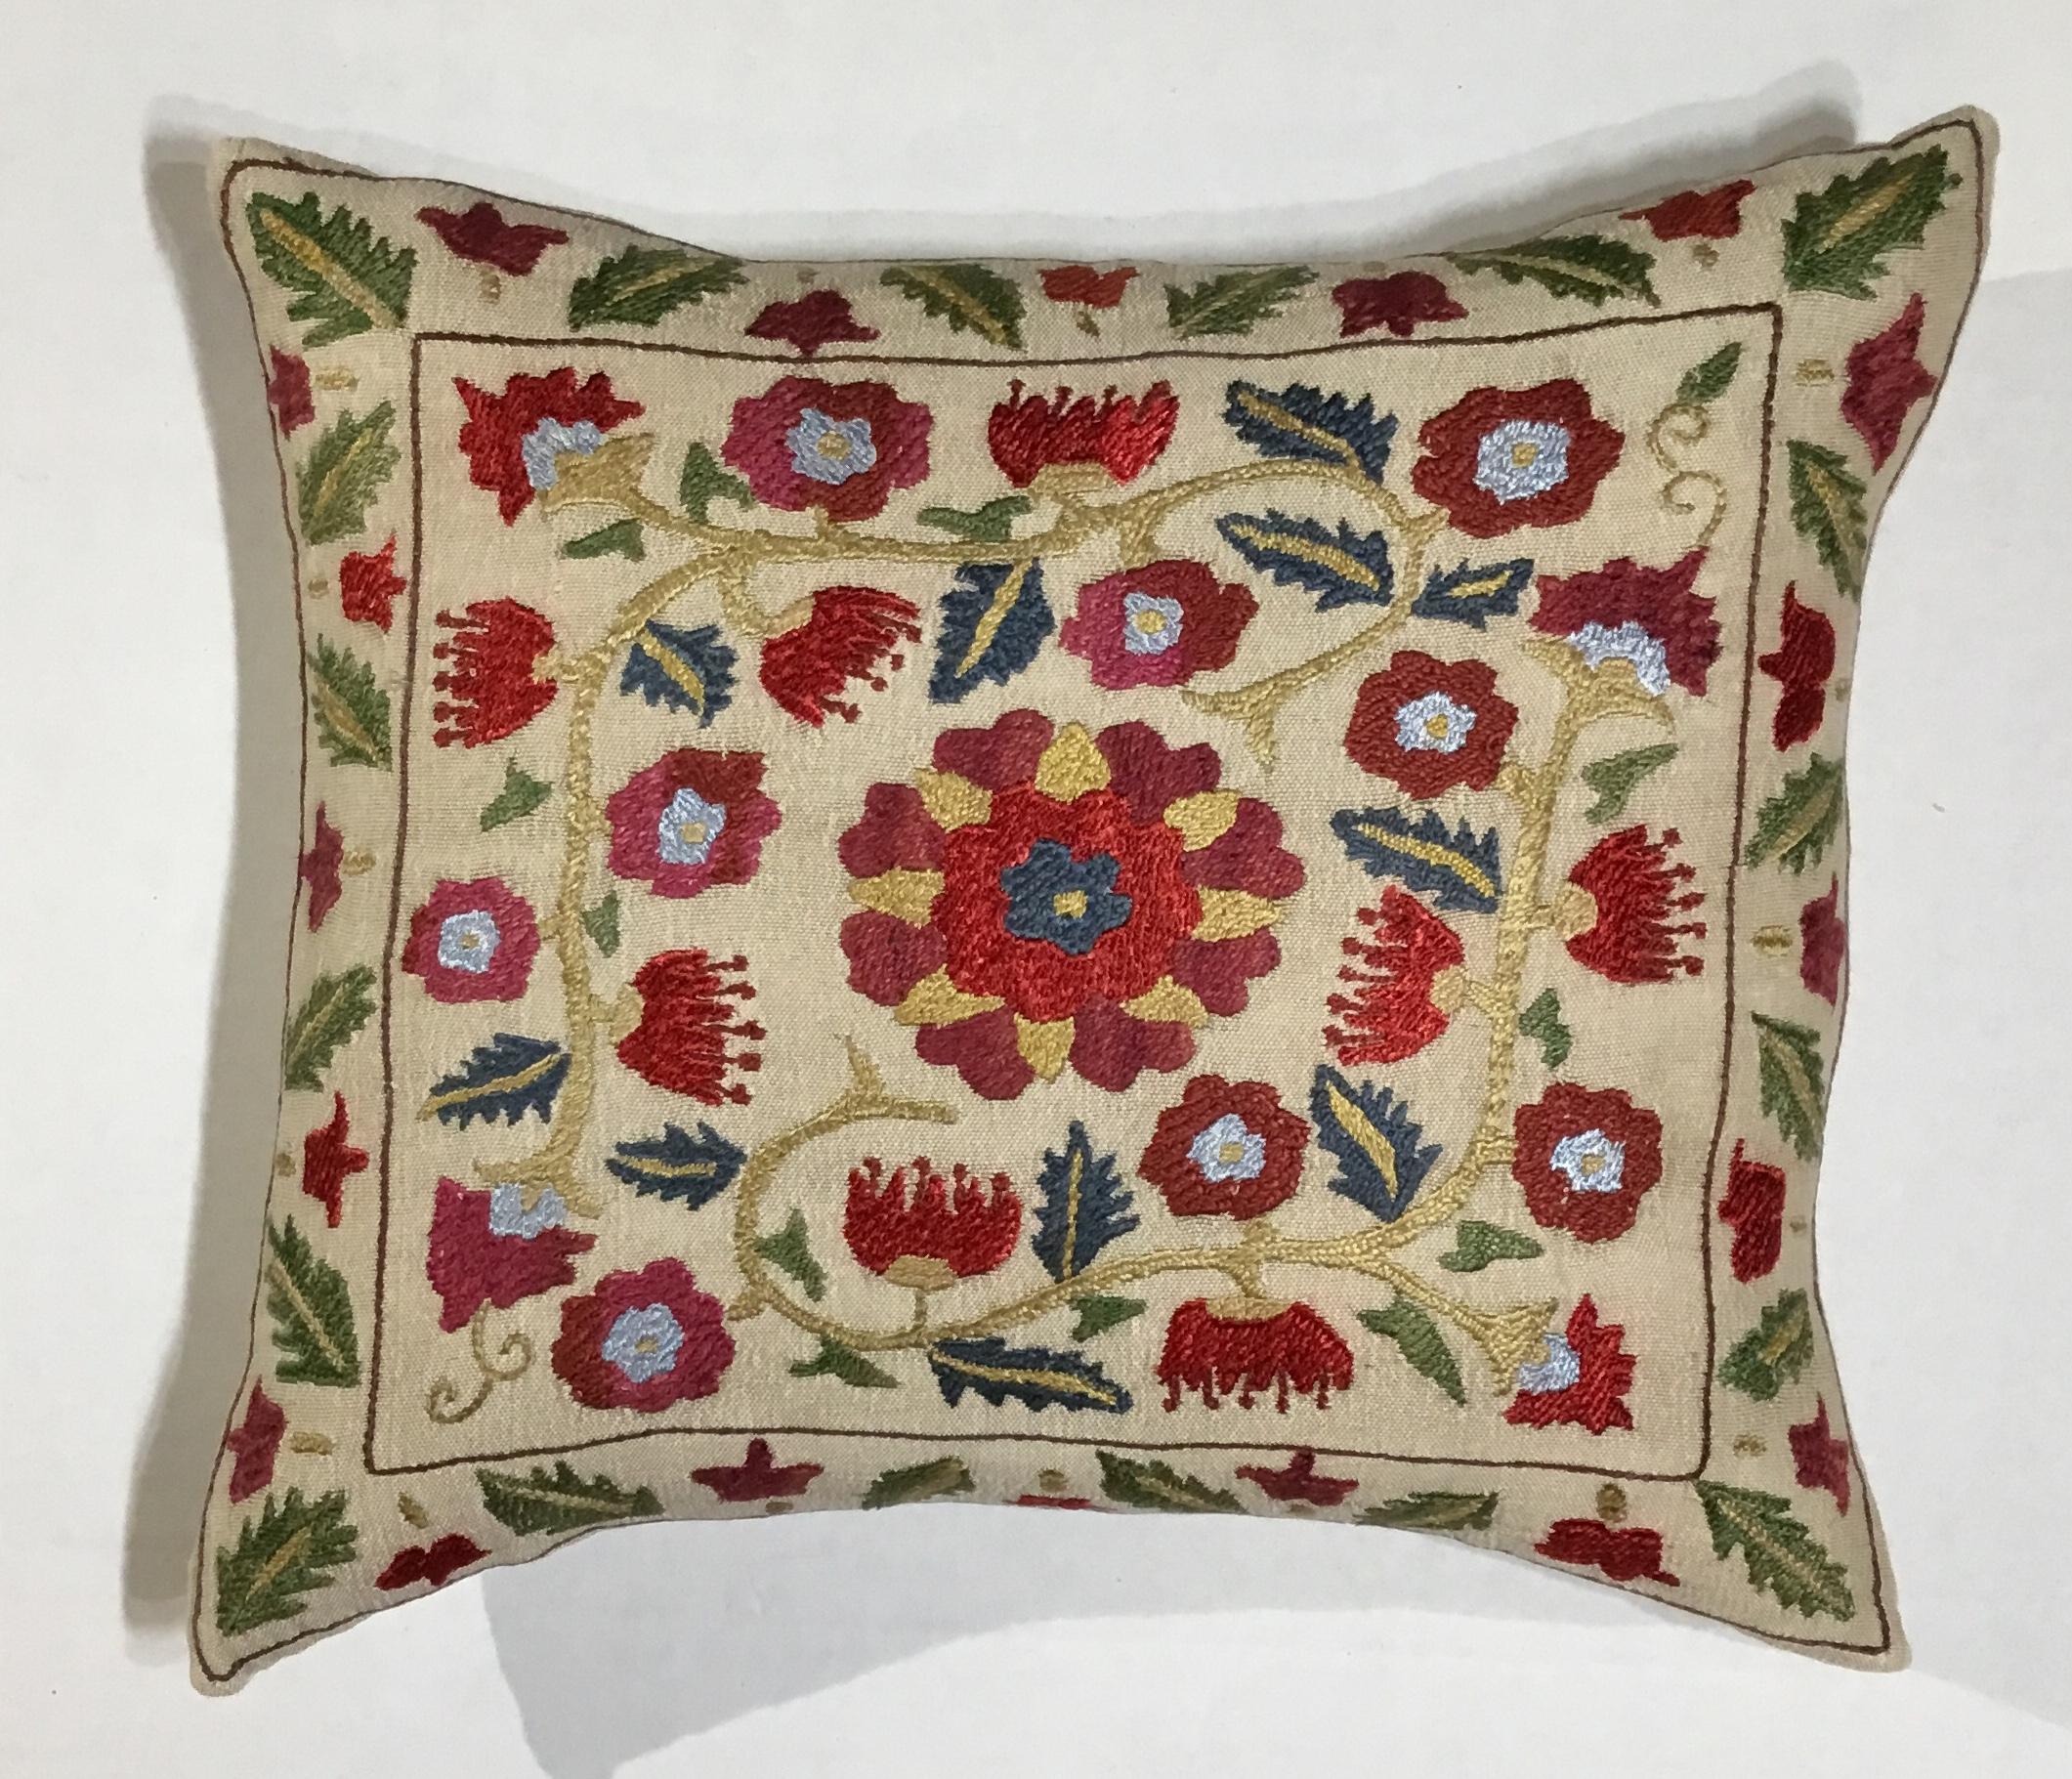 Beautiful pillow made of hand embroidery silk on cream color cotton background. Flowers and vine motifs all around, cotton backing with zipper, fresh new insert.